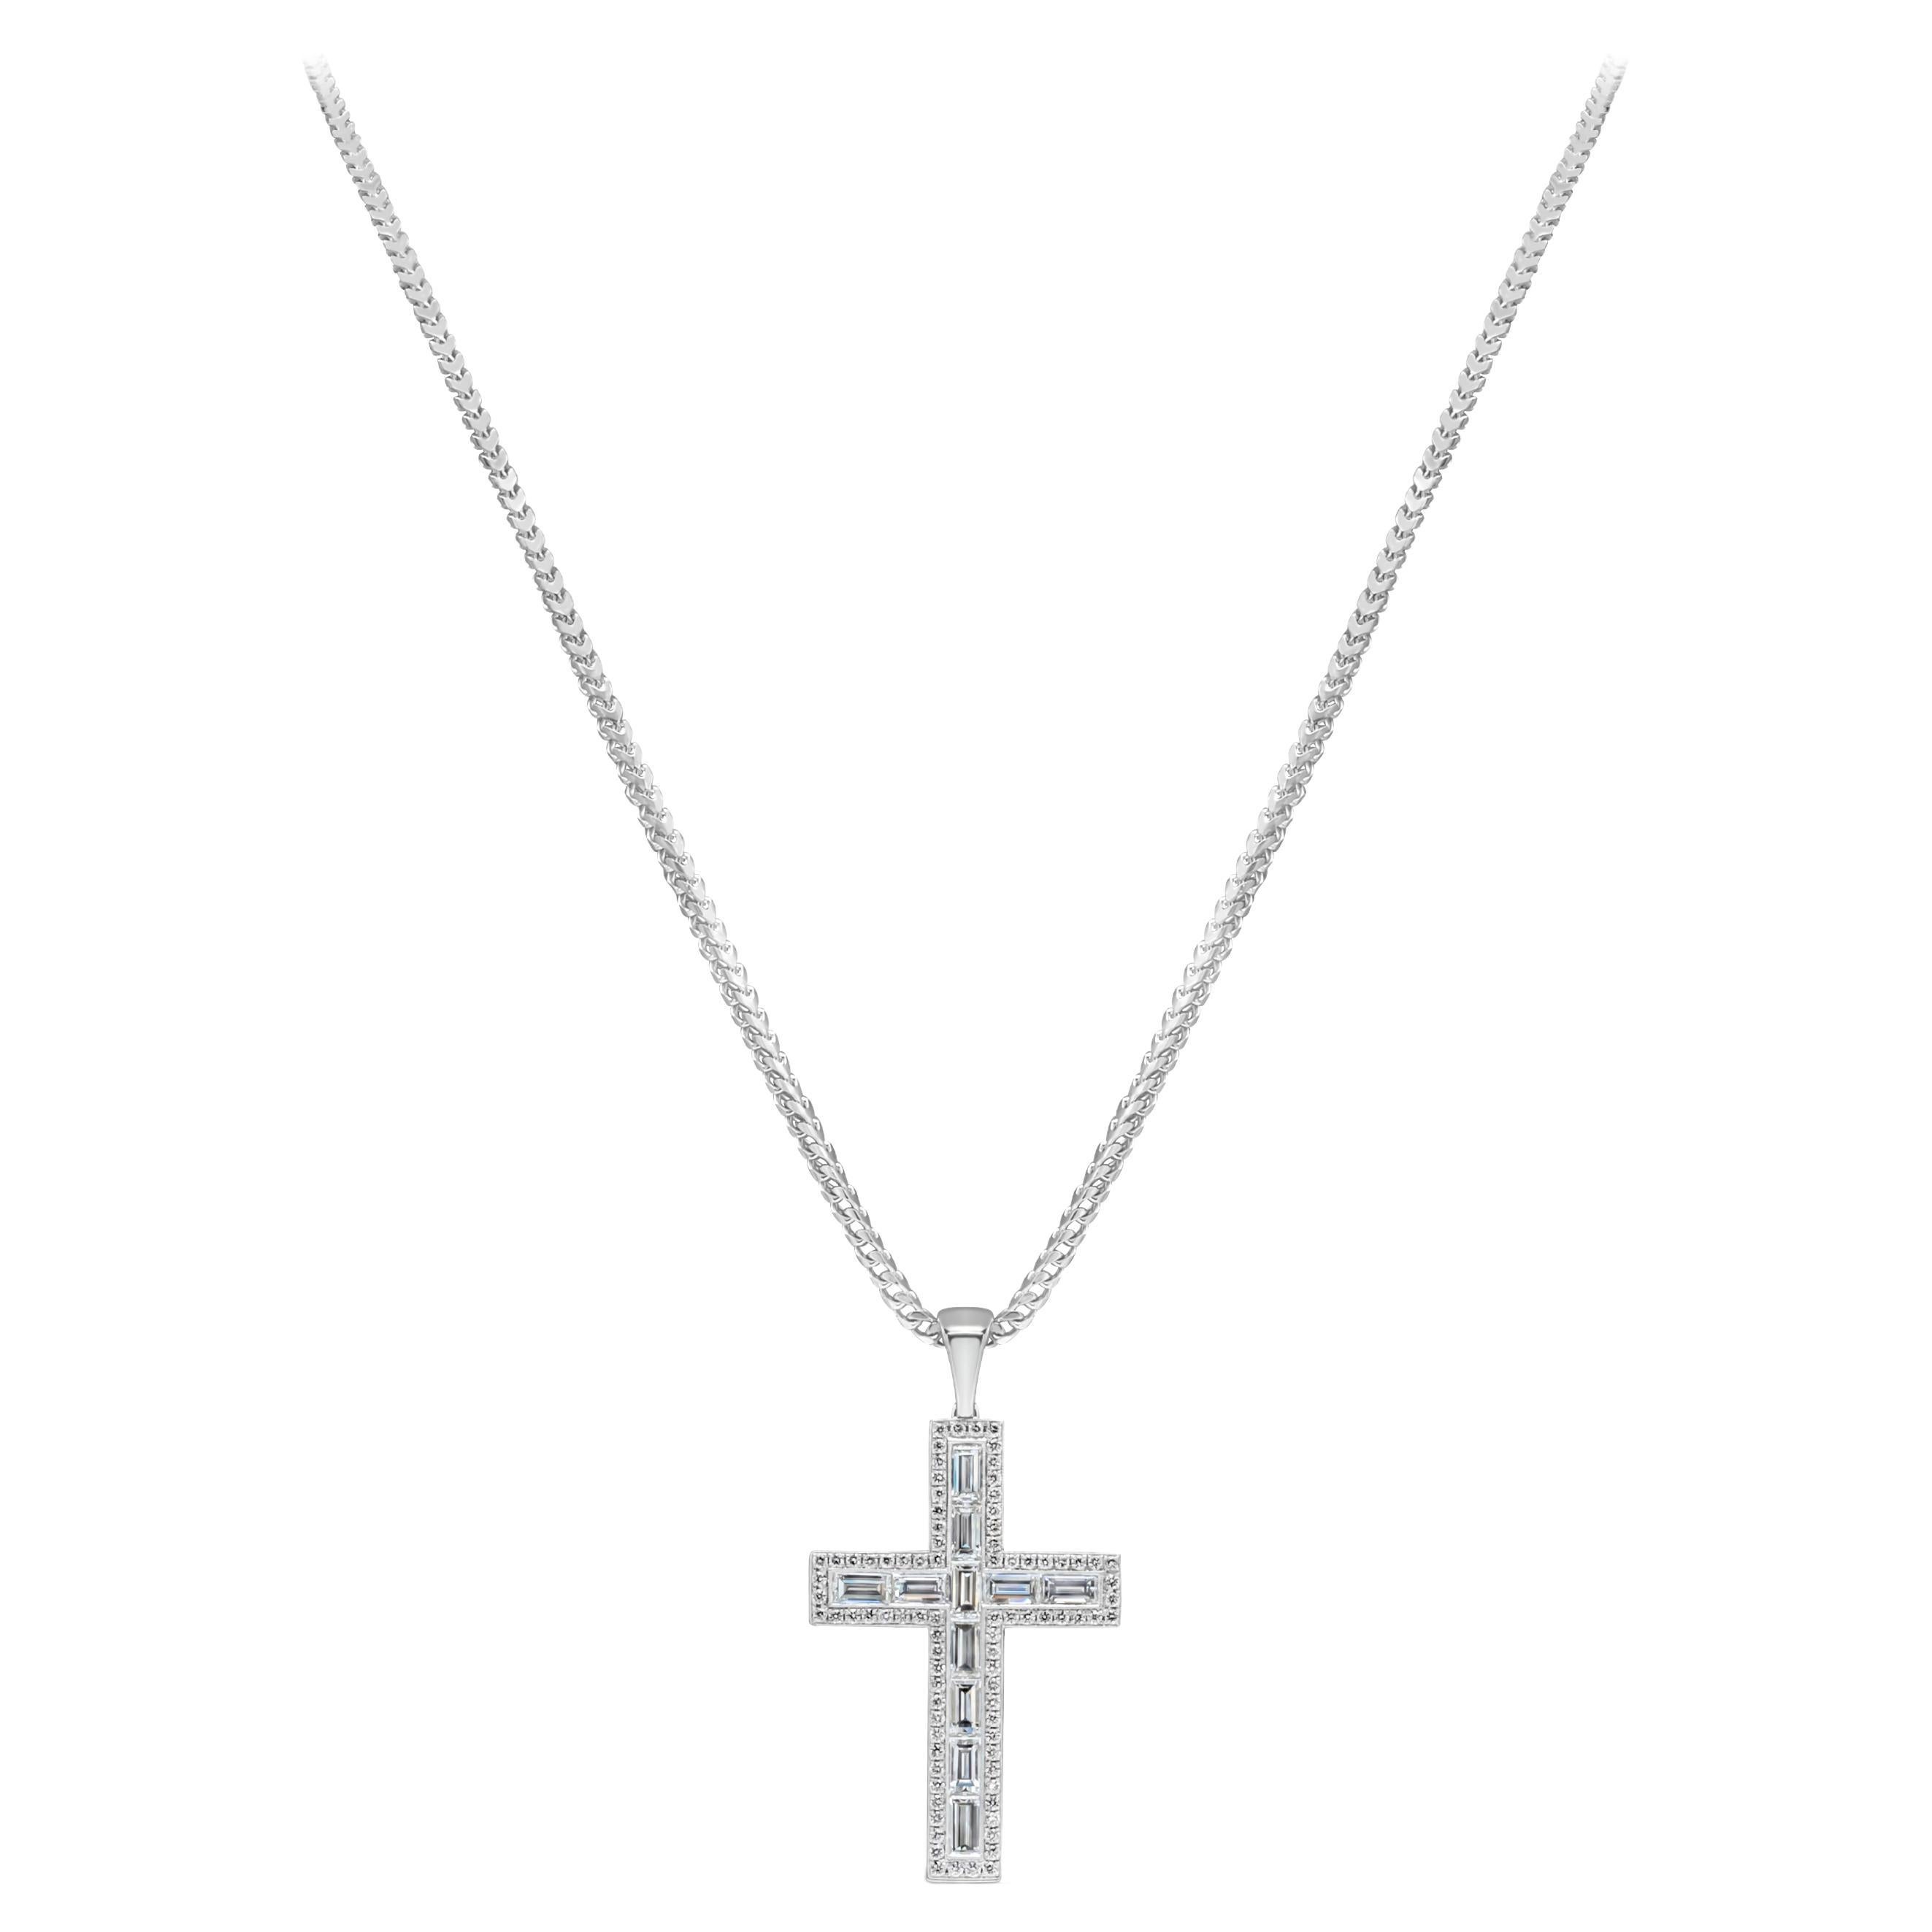 A fascinating religious cross pendant necklace showcasing channel set baguette diamonds weighing 4.10 carats G Color and VS+ in Clarity, Surrounded by brilliant round diamonds around weighing 0.89 carats, hanging from a 10mm bail, suspended on a